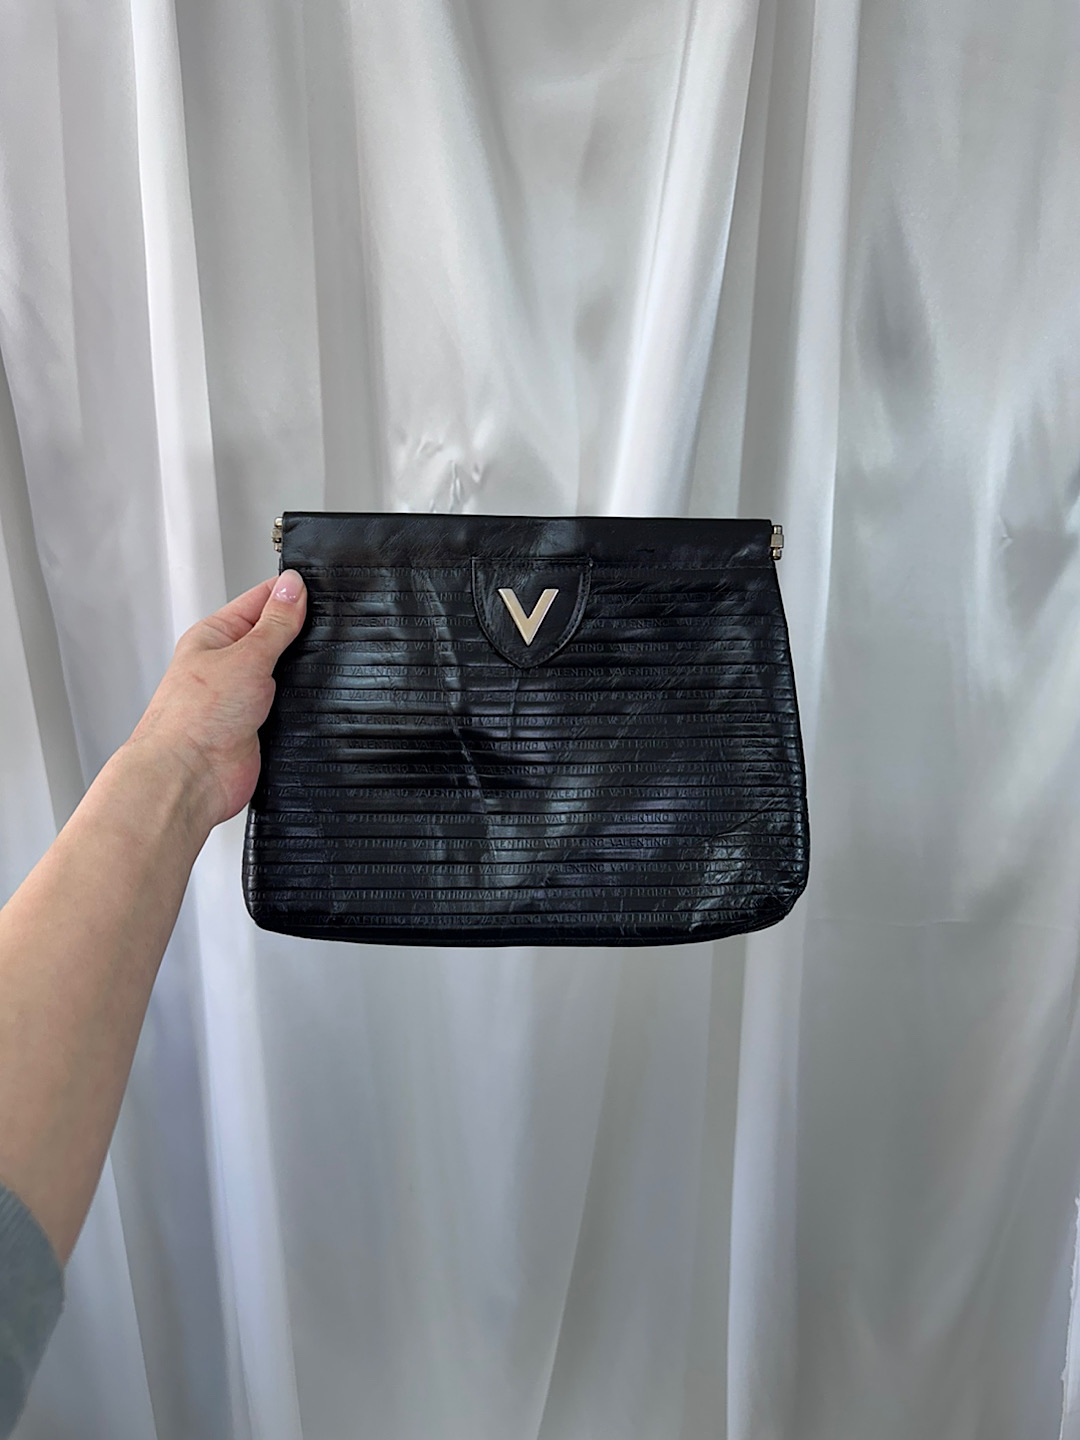 MARIO VALENTINO leather bag (made in Italy)